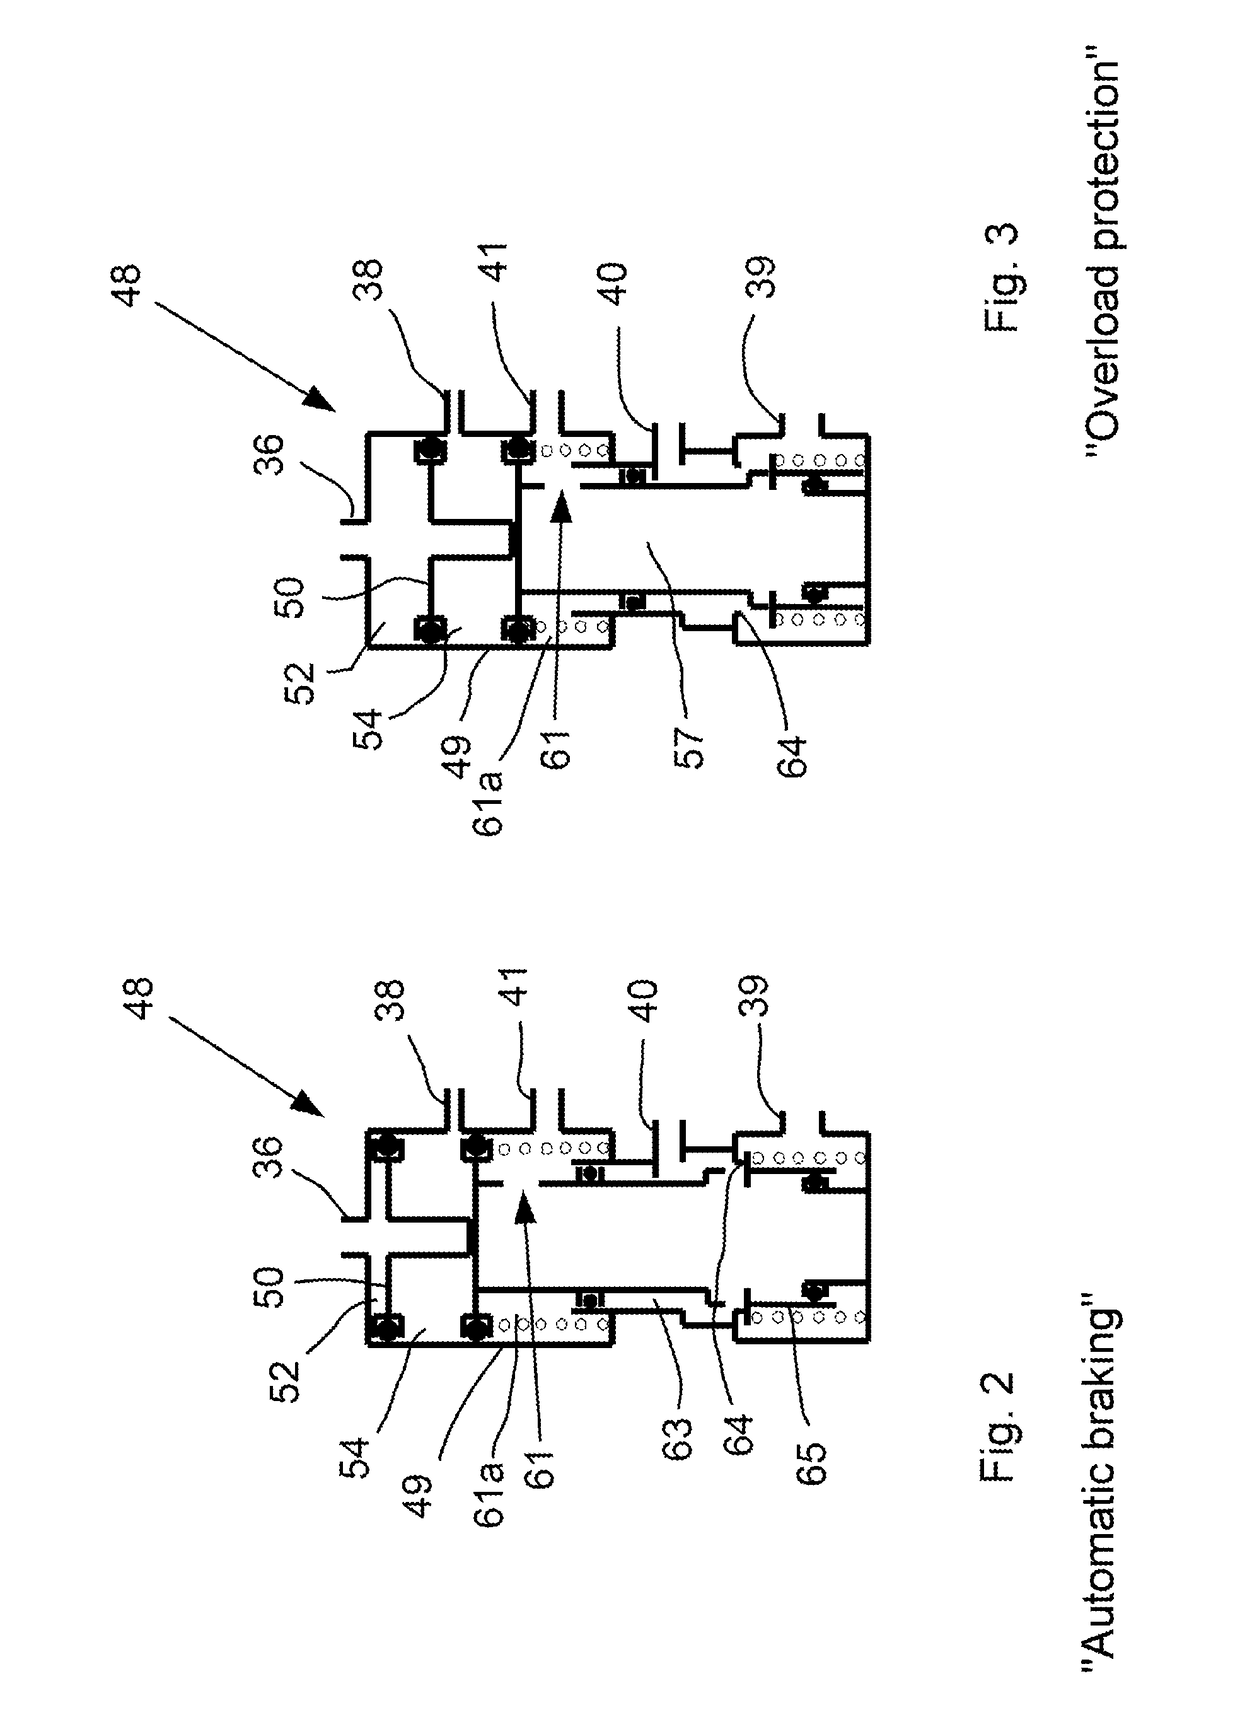 Pneumatic braking system for a trailer vehicle